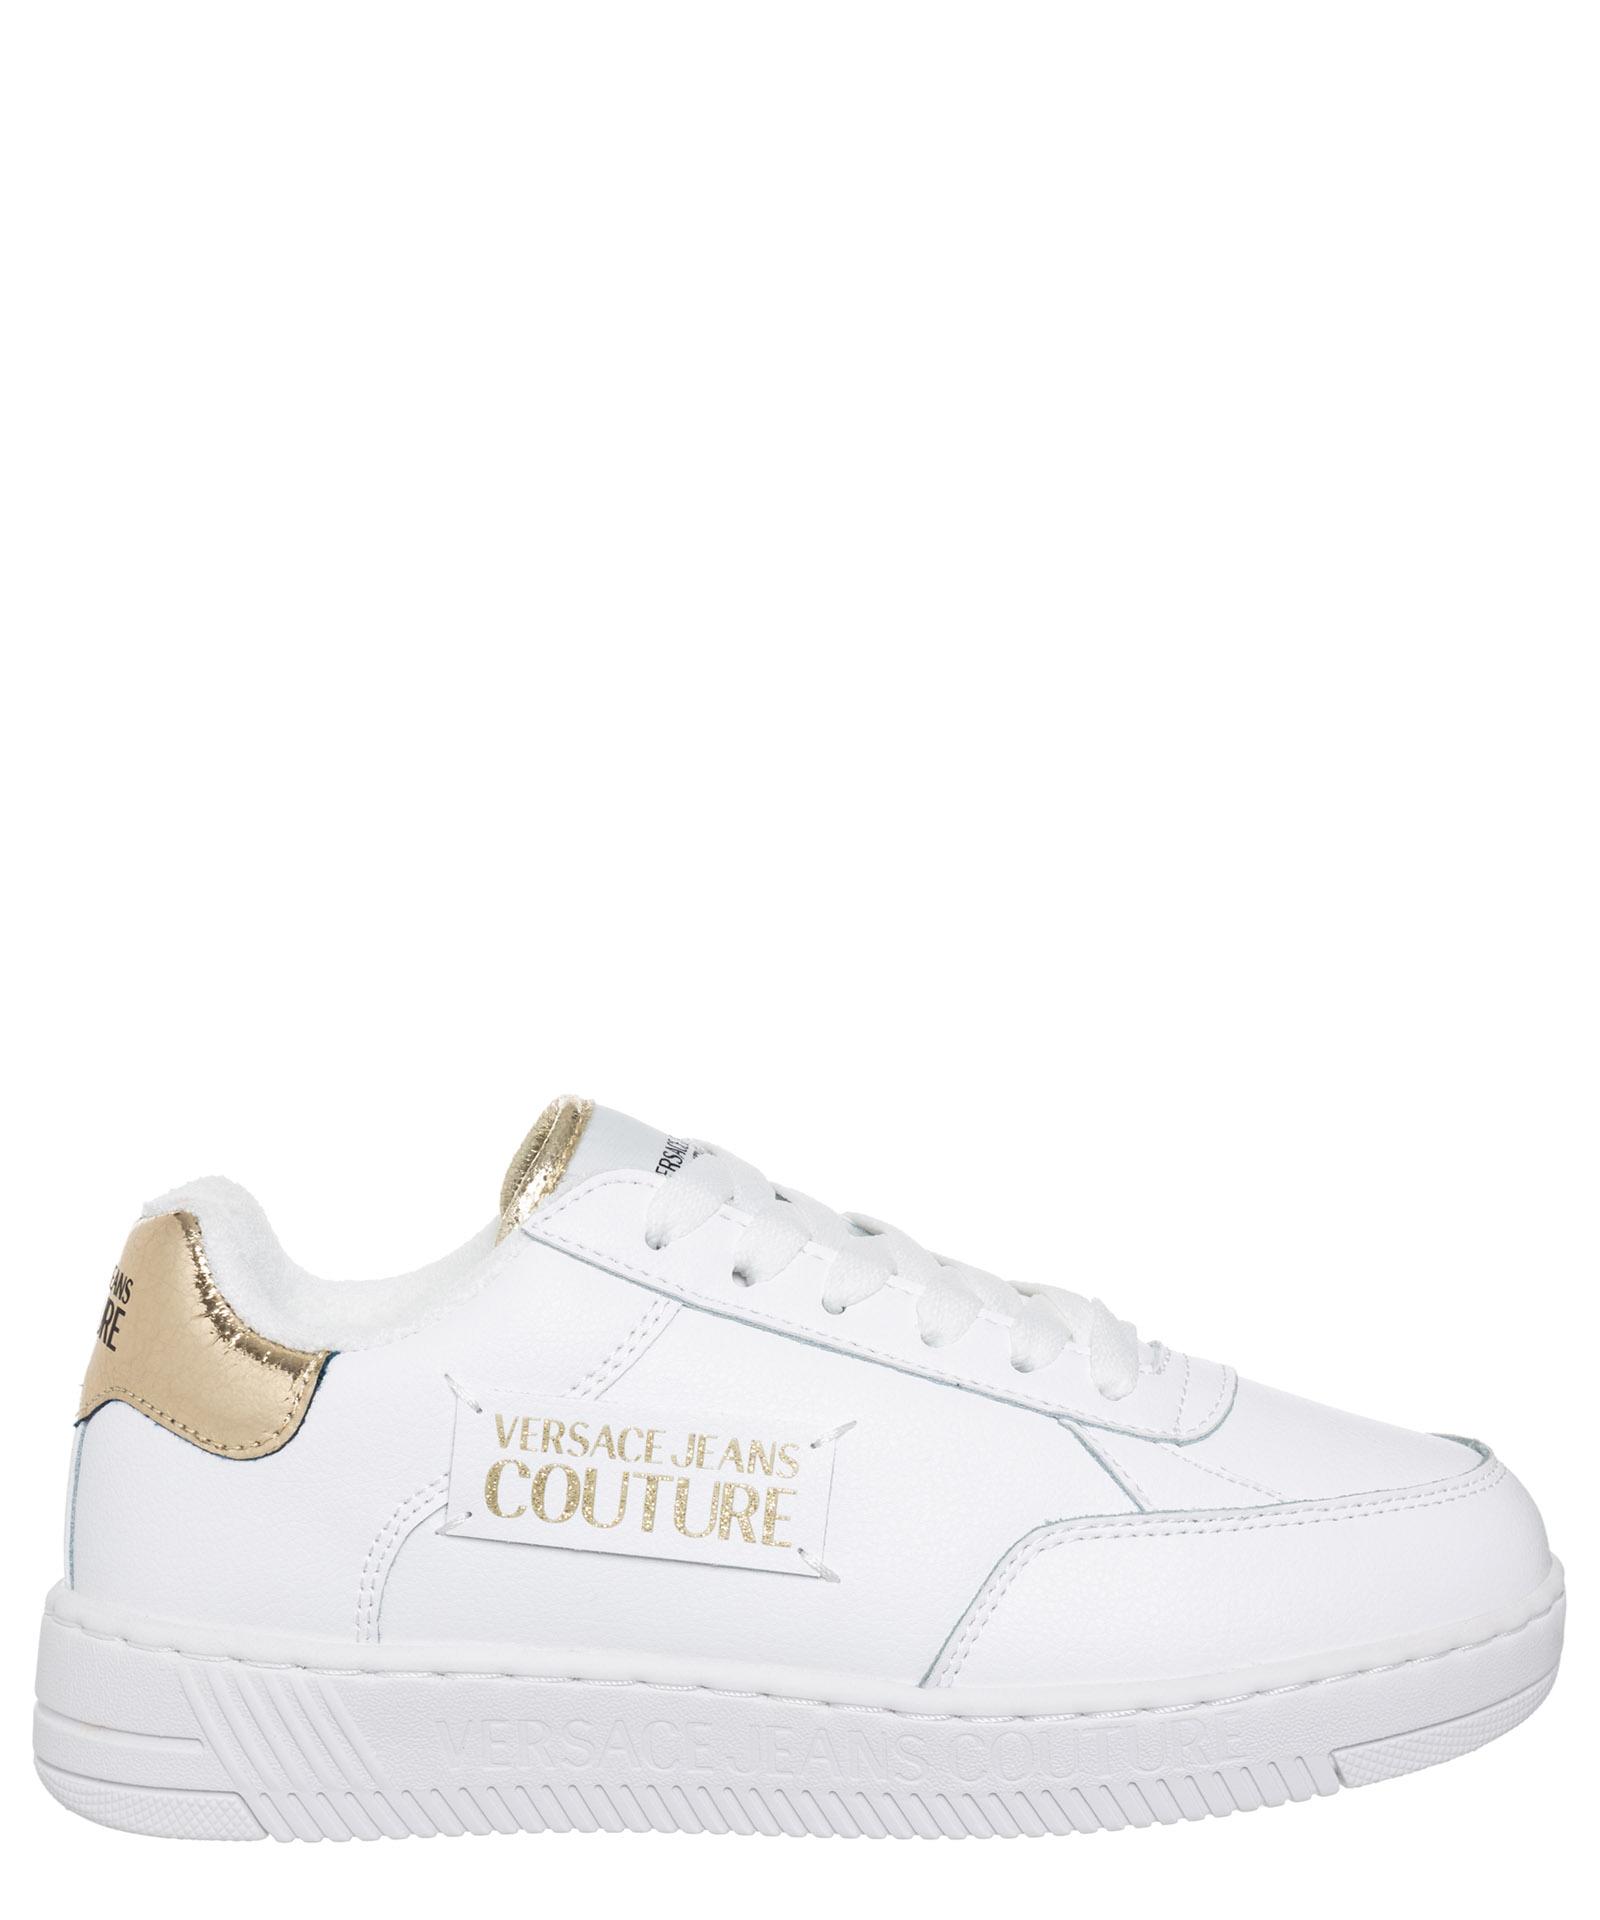 Versace Jeans Couture Meyssa Sneakers in White | Lyst